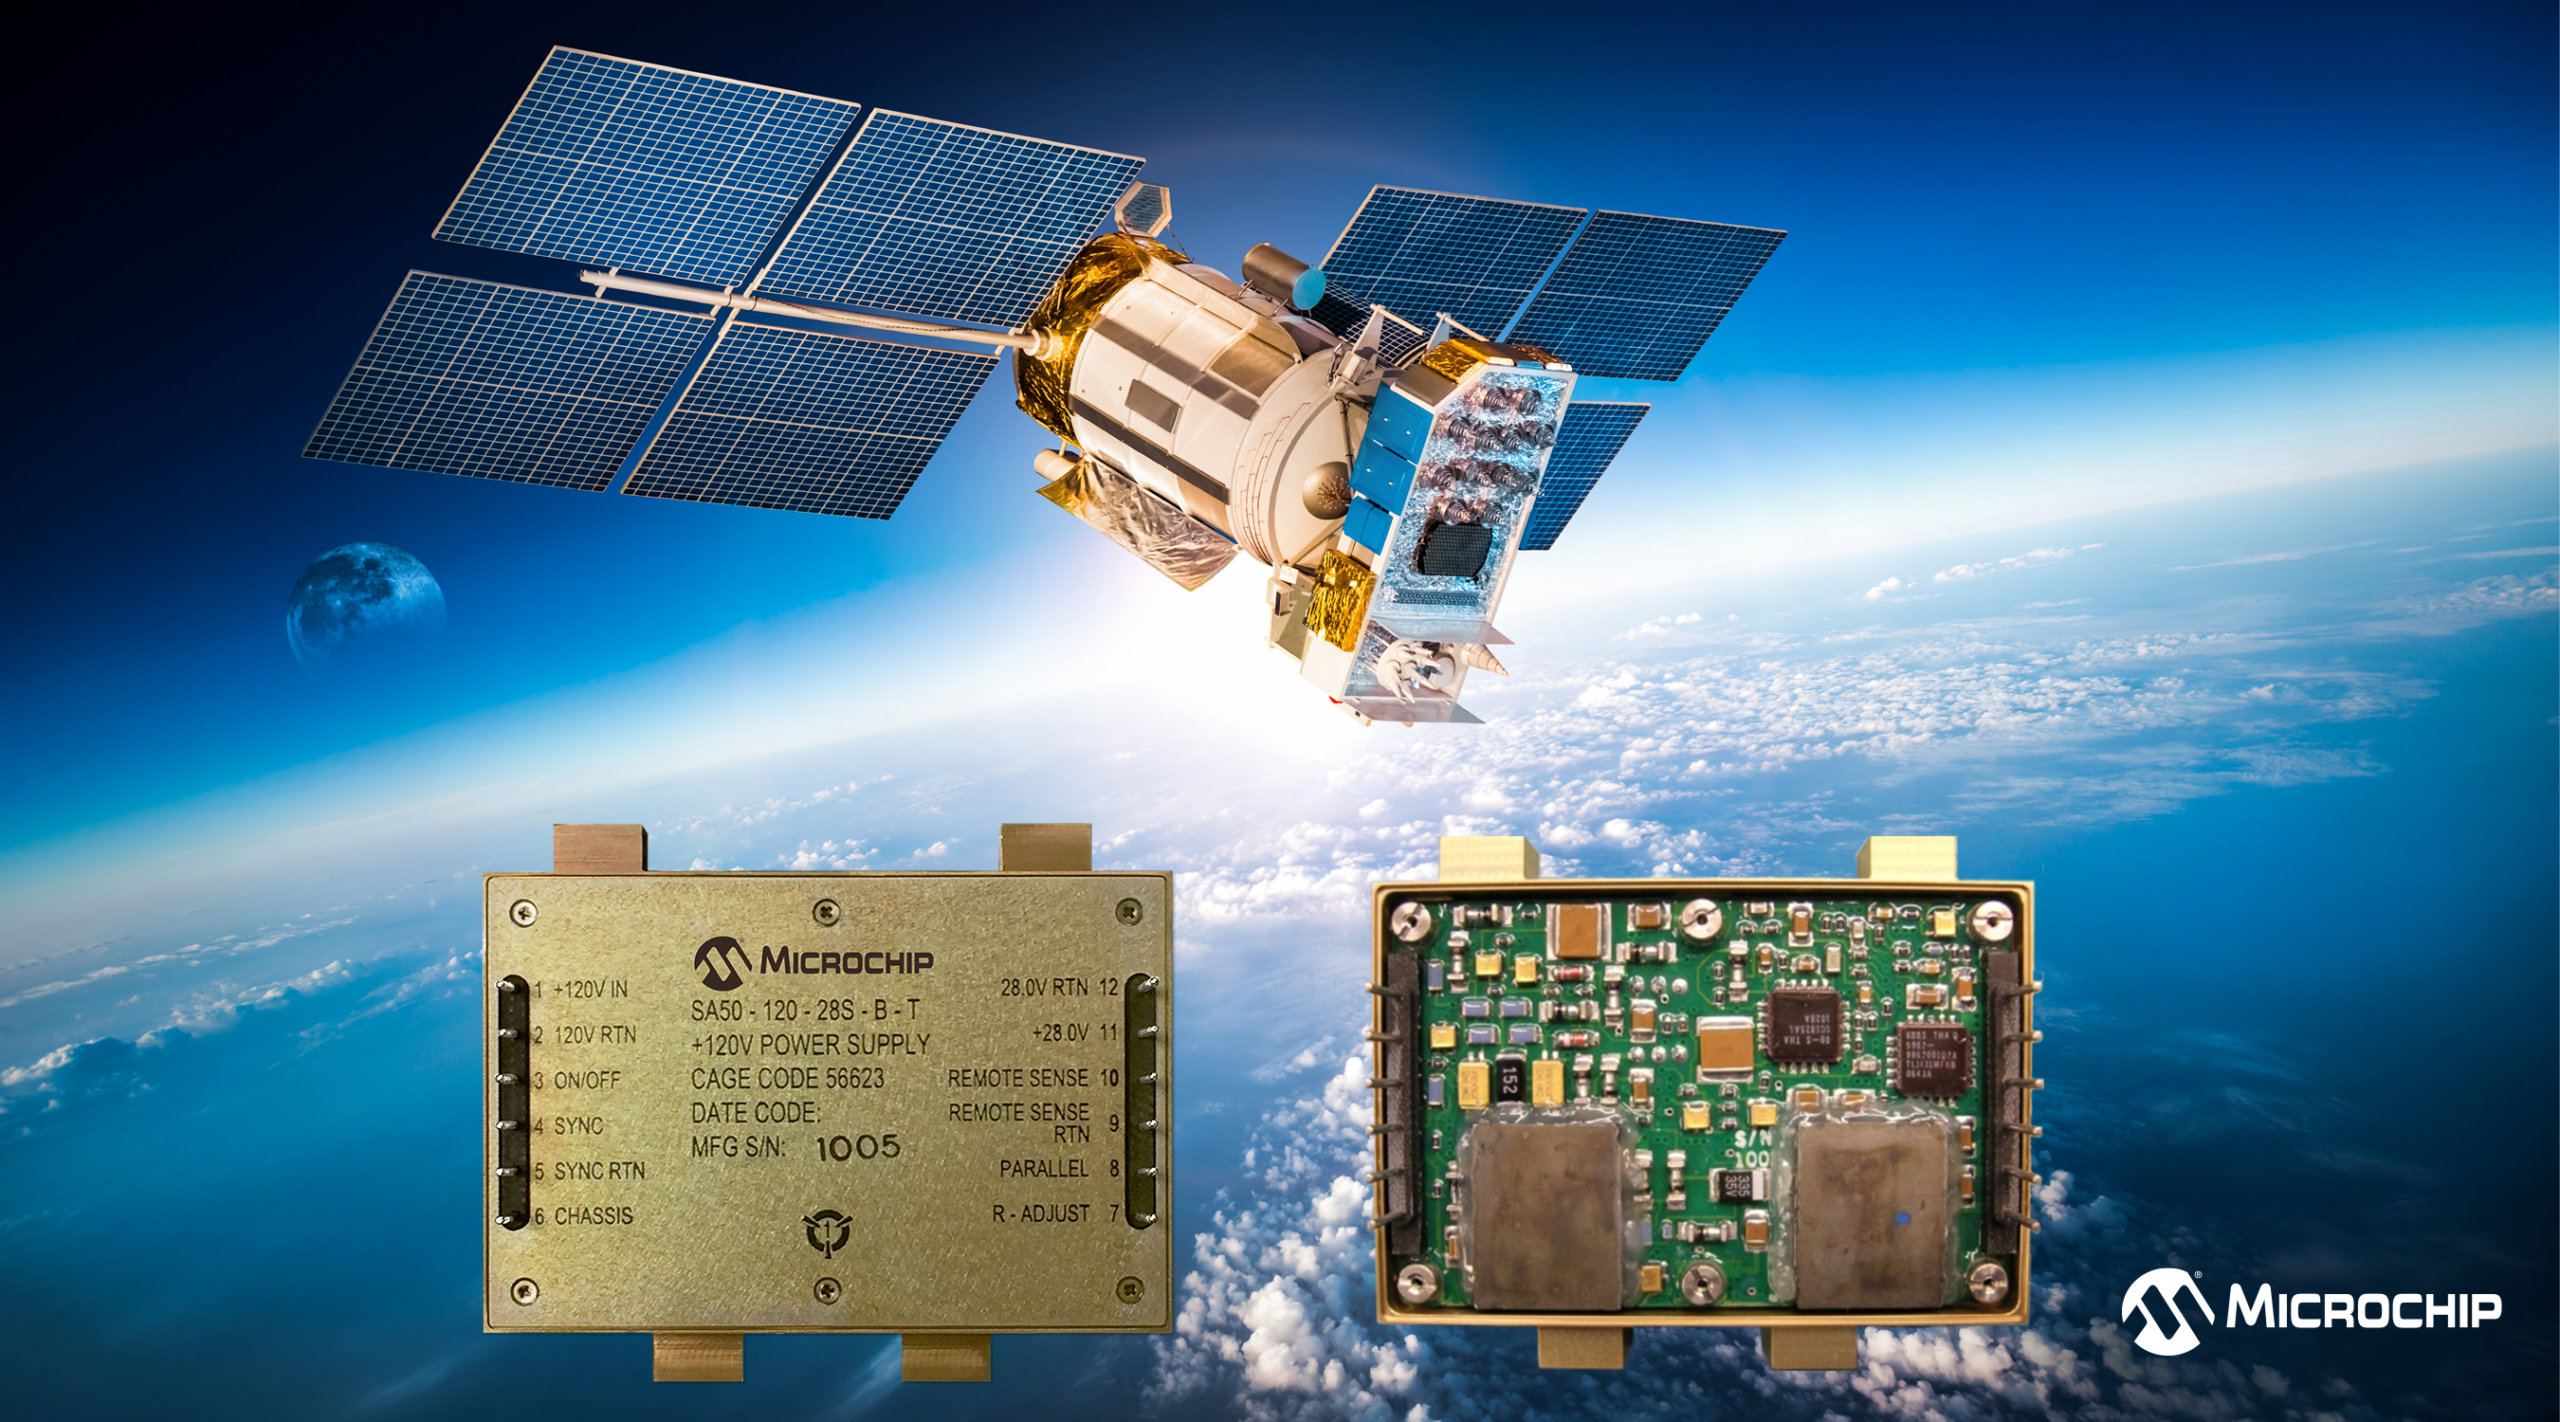 Microchip Announces Space-Qualified COTS-Based Radiation-Hardened Power Converters Expansion of SA50-120 family introduces qualified 100V and 120V bus systems for space applications New Delhi, February 24, 2021 – As reliance on communication and weather satellites grows and space research expands in scope and mission, new technology is required to help speed spaceflight system design and production. Microchip Technology Inc. (Nasdaq: MCHP) today announced the expansion of its SA50-120 power converter family with nine new units based on its Commercial Off-the-Shelf (COTS) technology. This technology provides developers with space-qualified power converters that help to minimize risk and lower development costs.